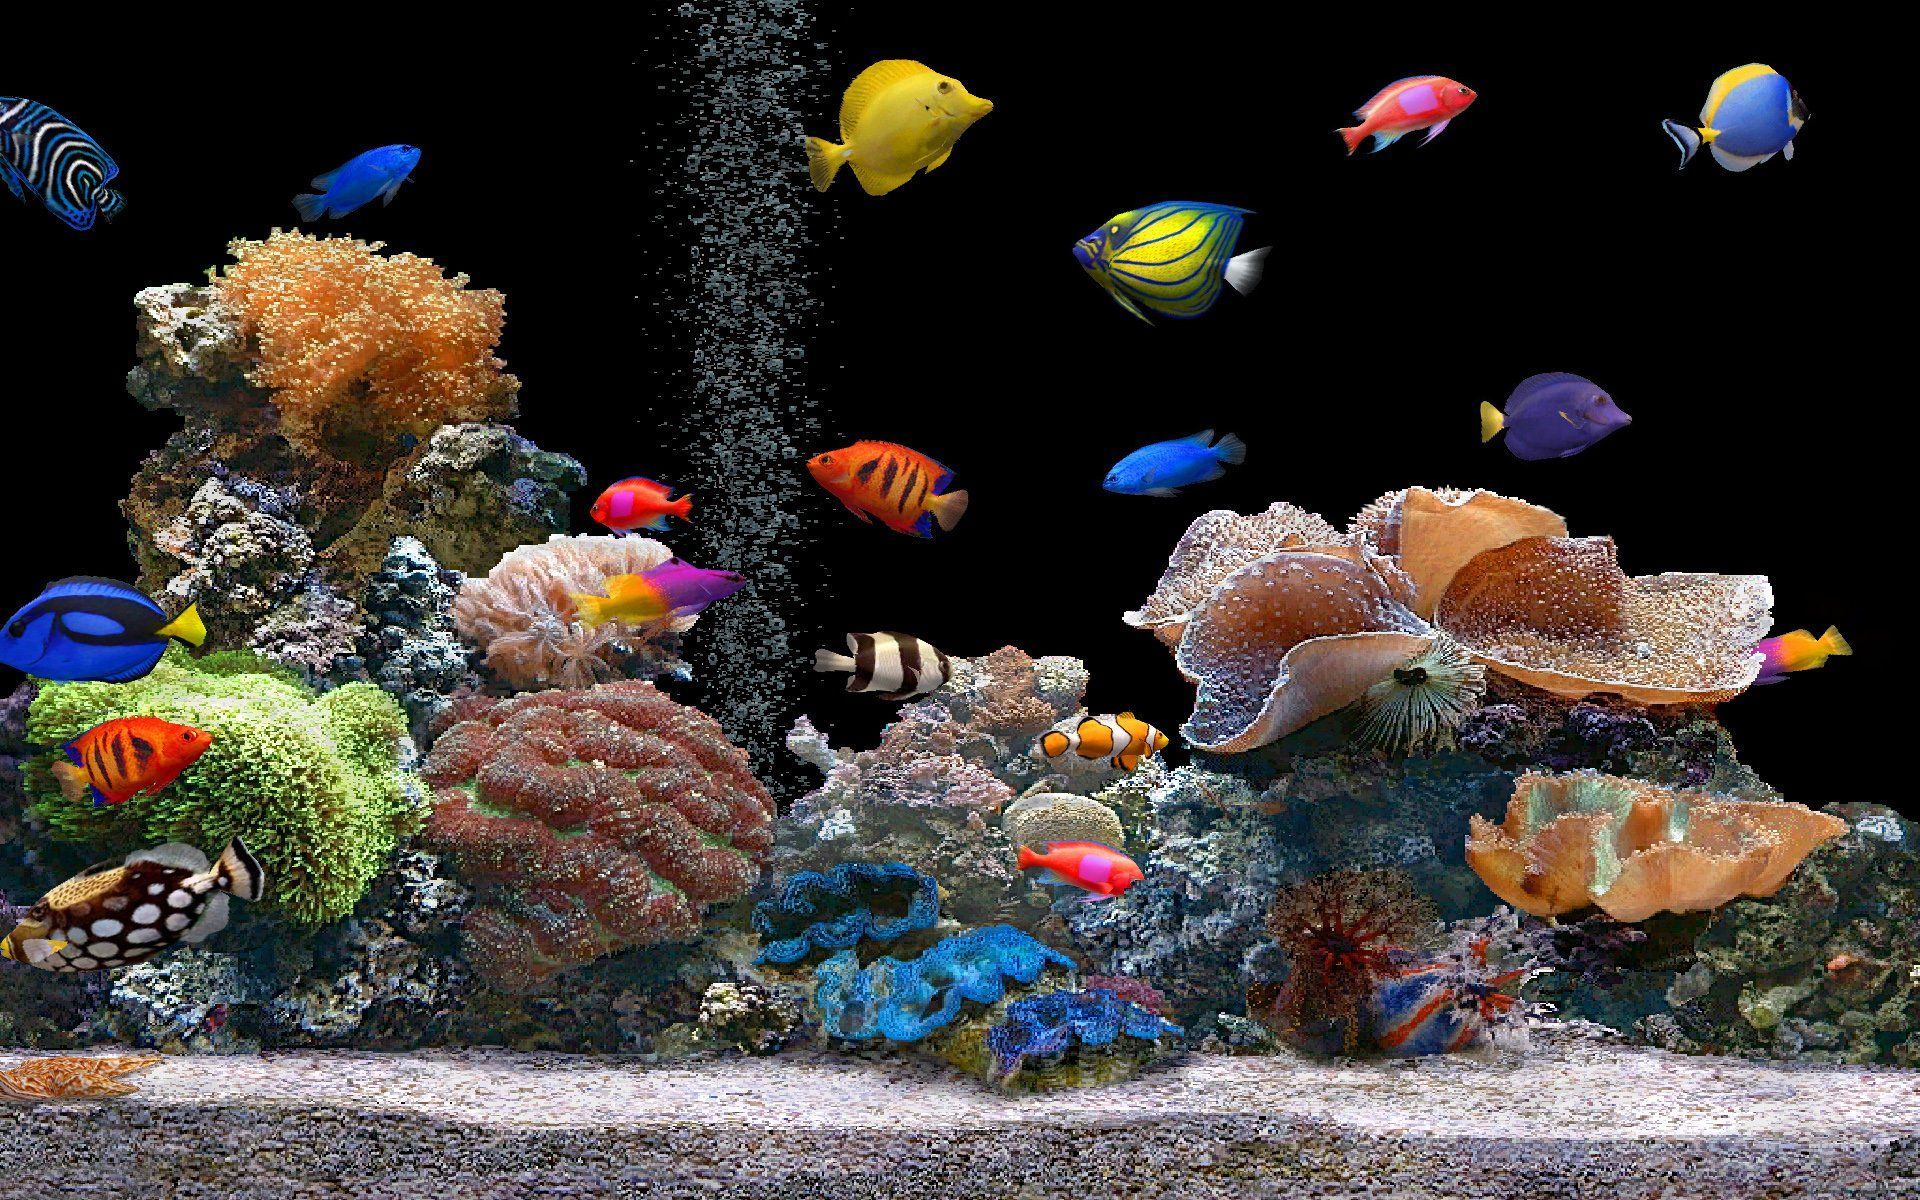 Top 5 Aquarium LED Lights - How To Choose The Right One For Your Tank